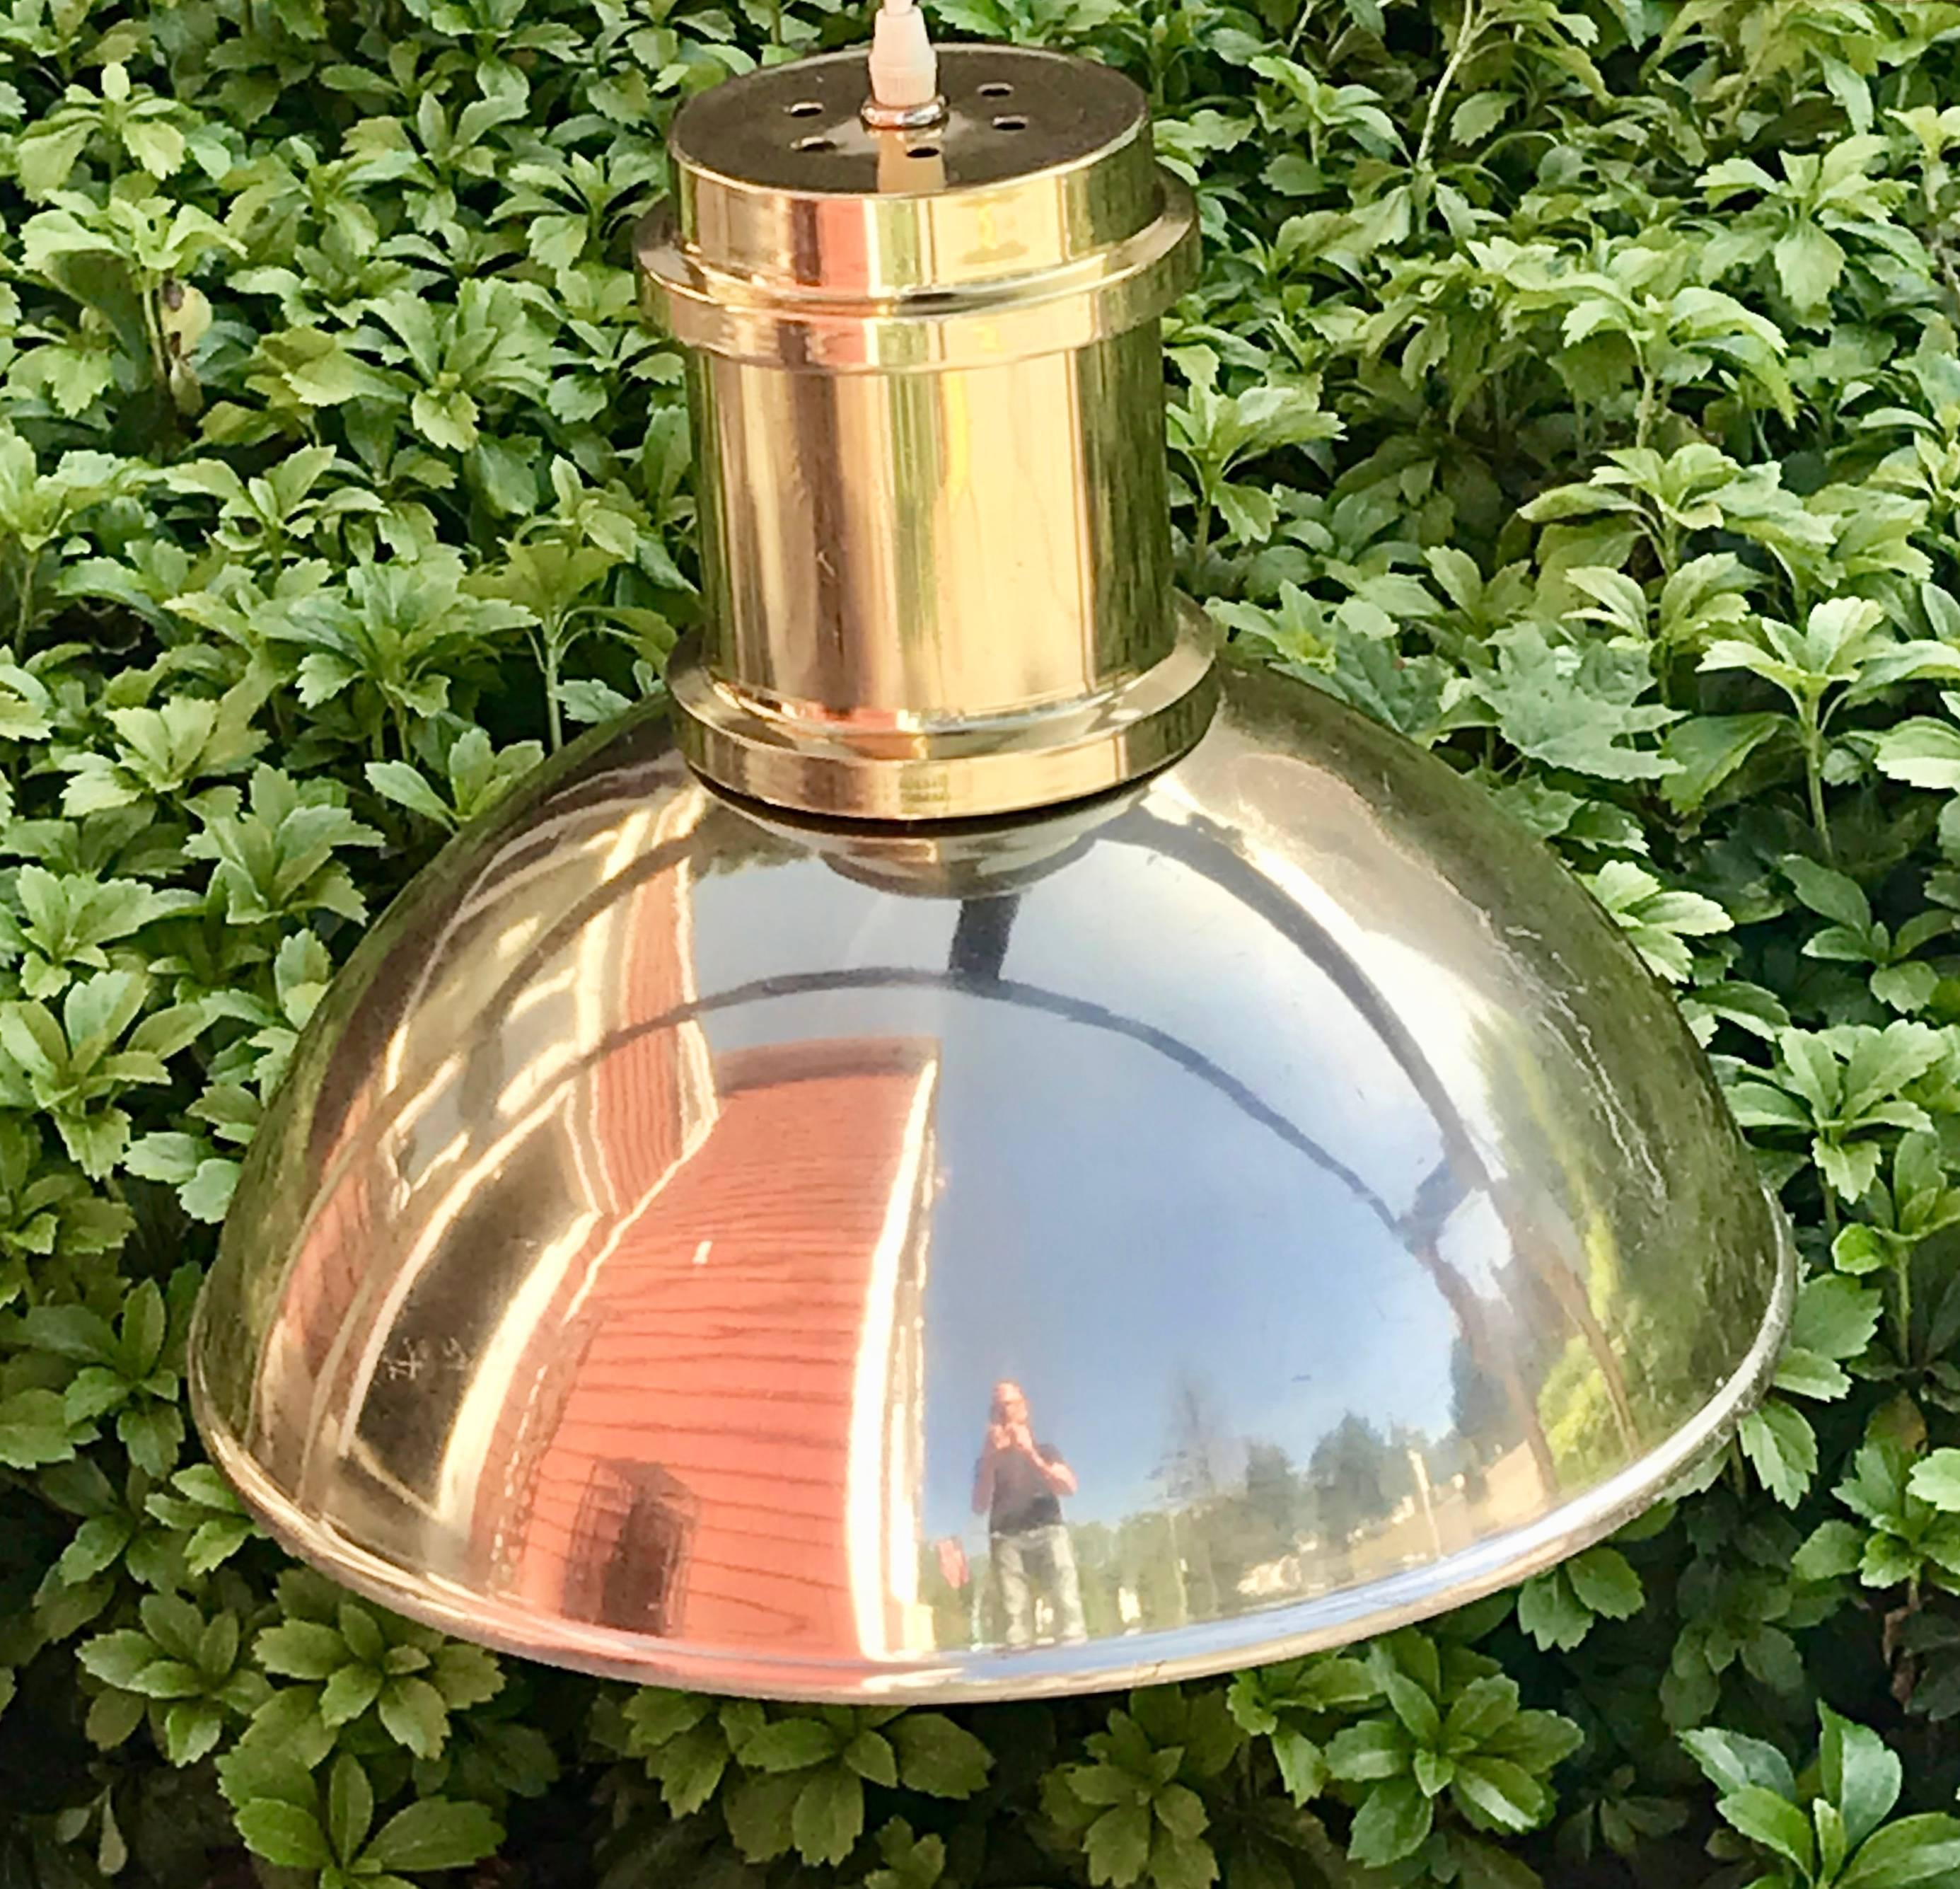 Nice pair of mid century round pendant lights, lacquered brass plated on aluminium shells, very lightweight. Possibly Lightolier, but no markings, original ceiling plates included. Multiple surface scratches on both.